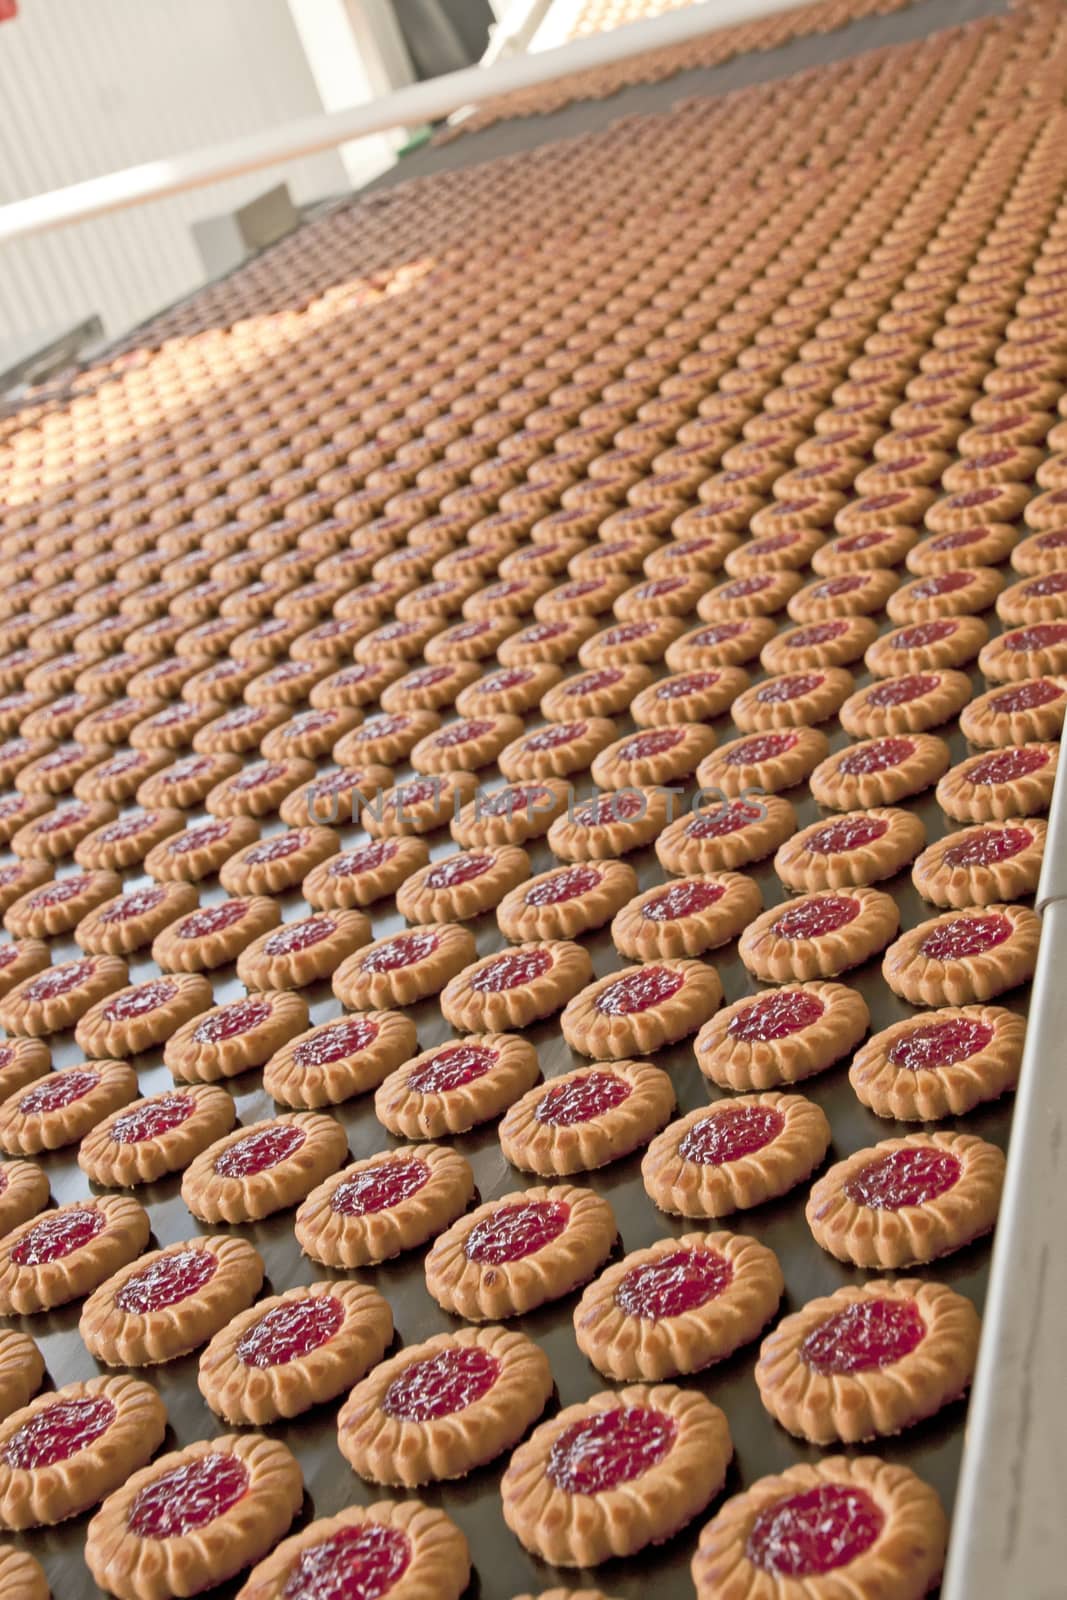 Production line of baking  jam cookies